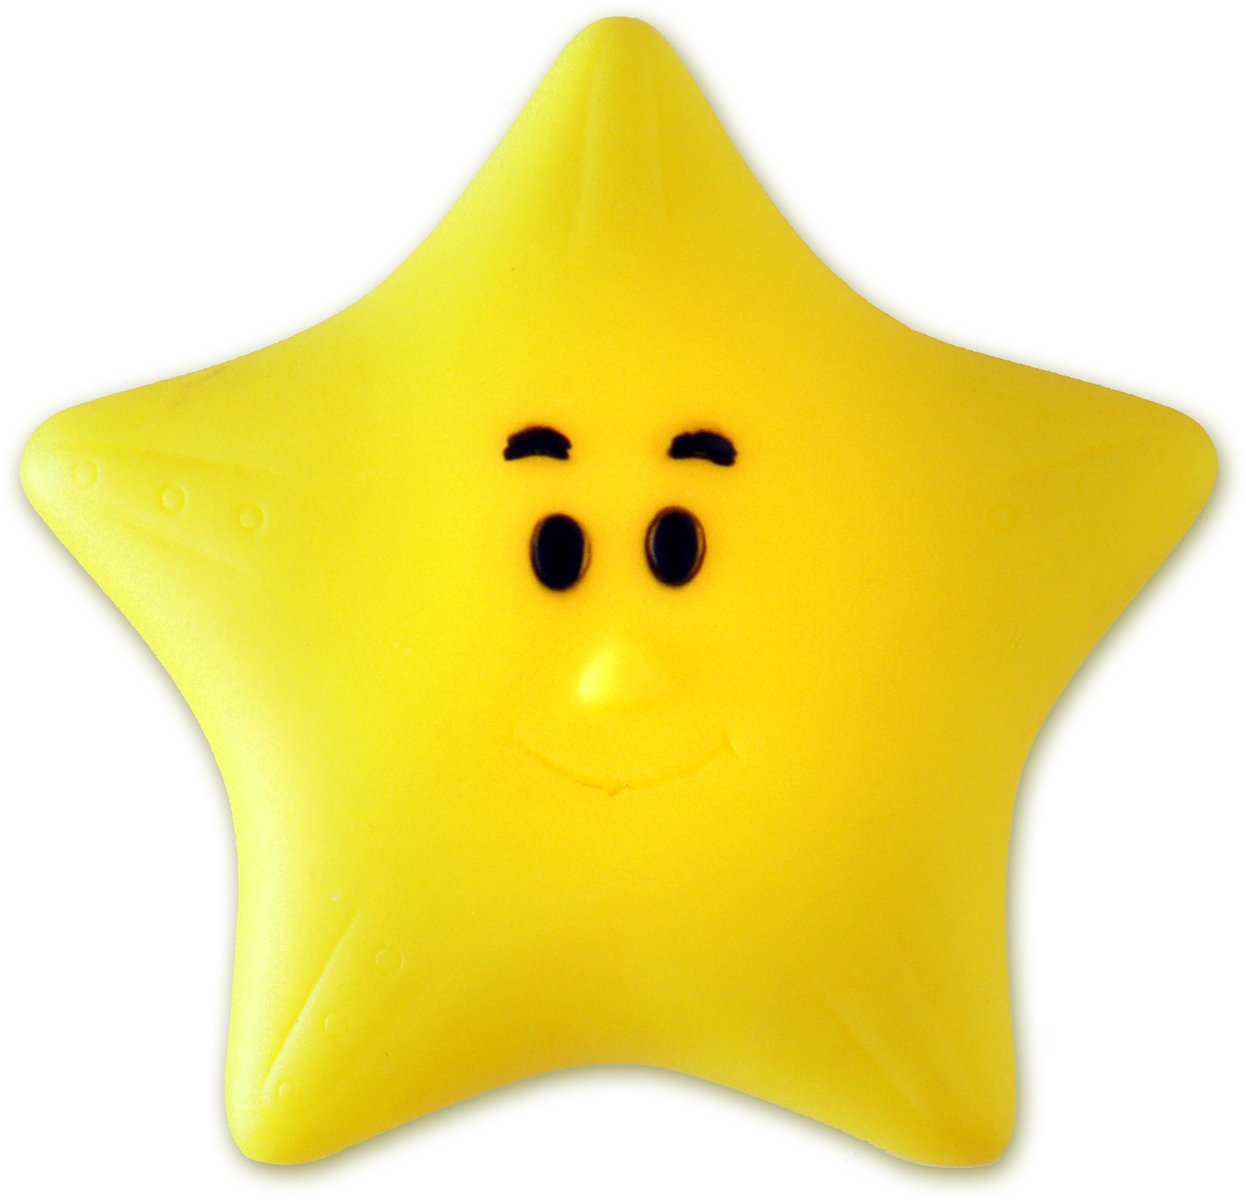 a yellow toy with a smiley face drawn on it